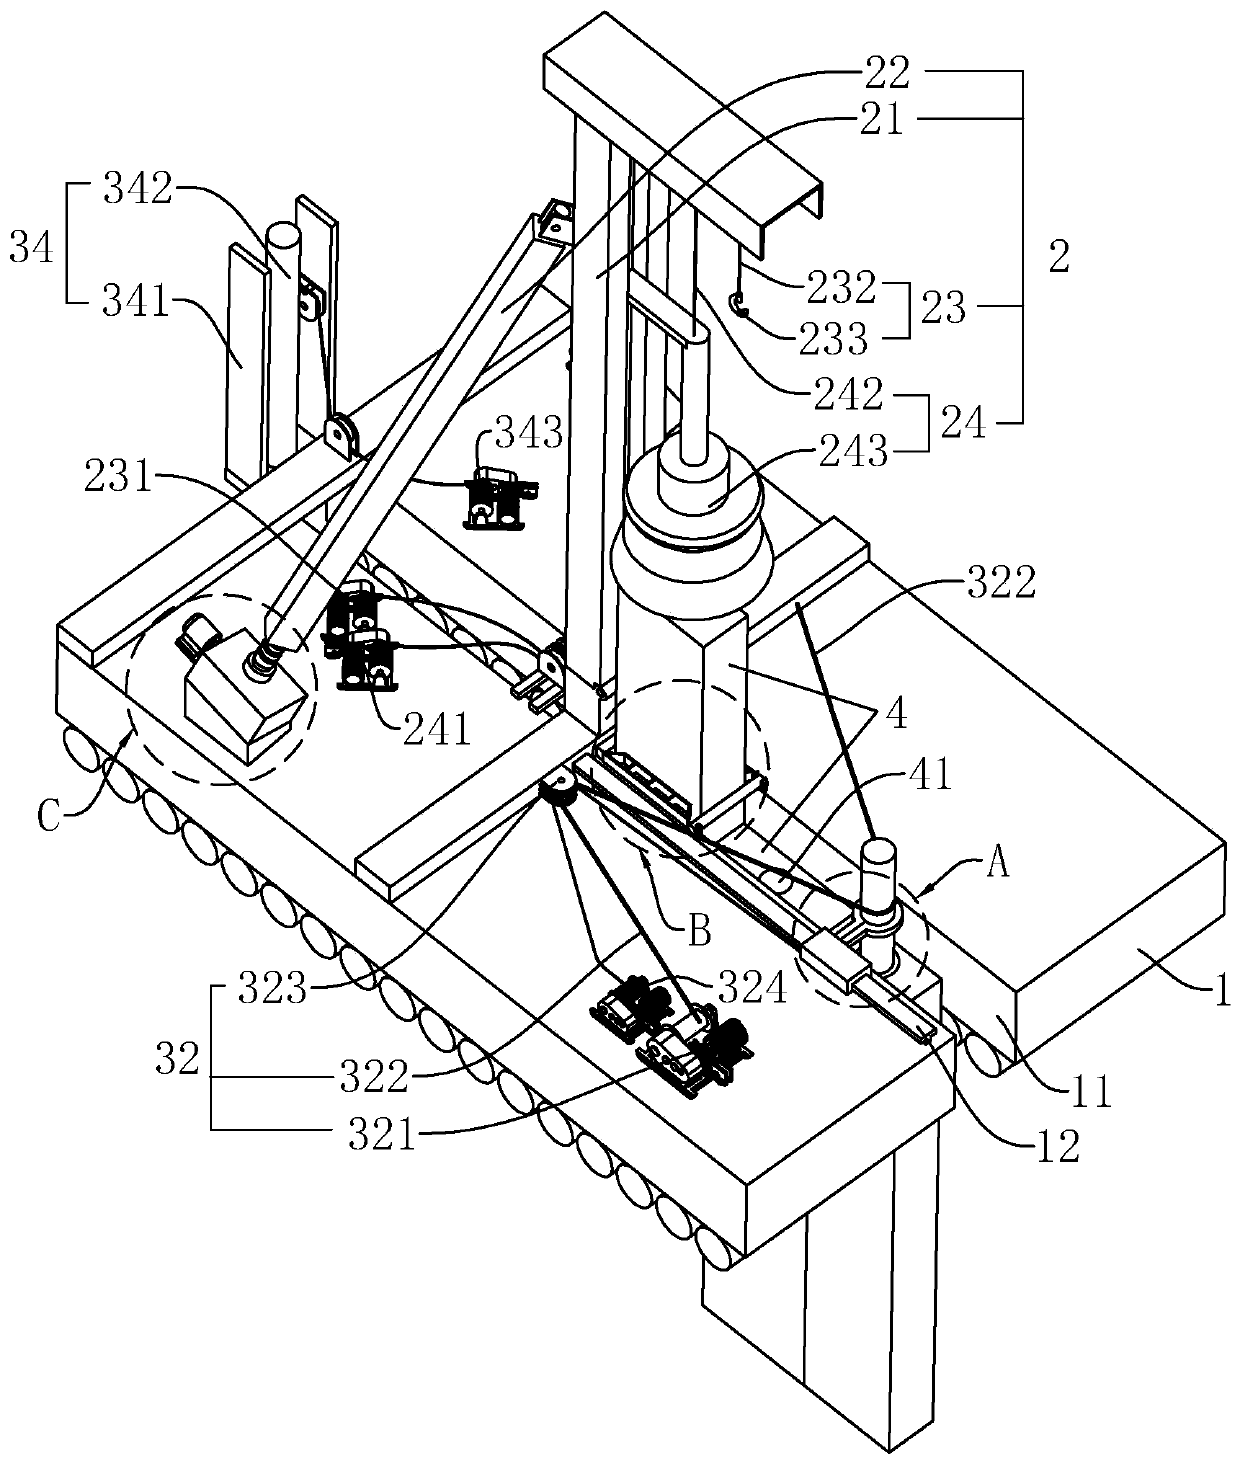 Piling device and method for construction of underwater reinforced concrete precast slab pile